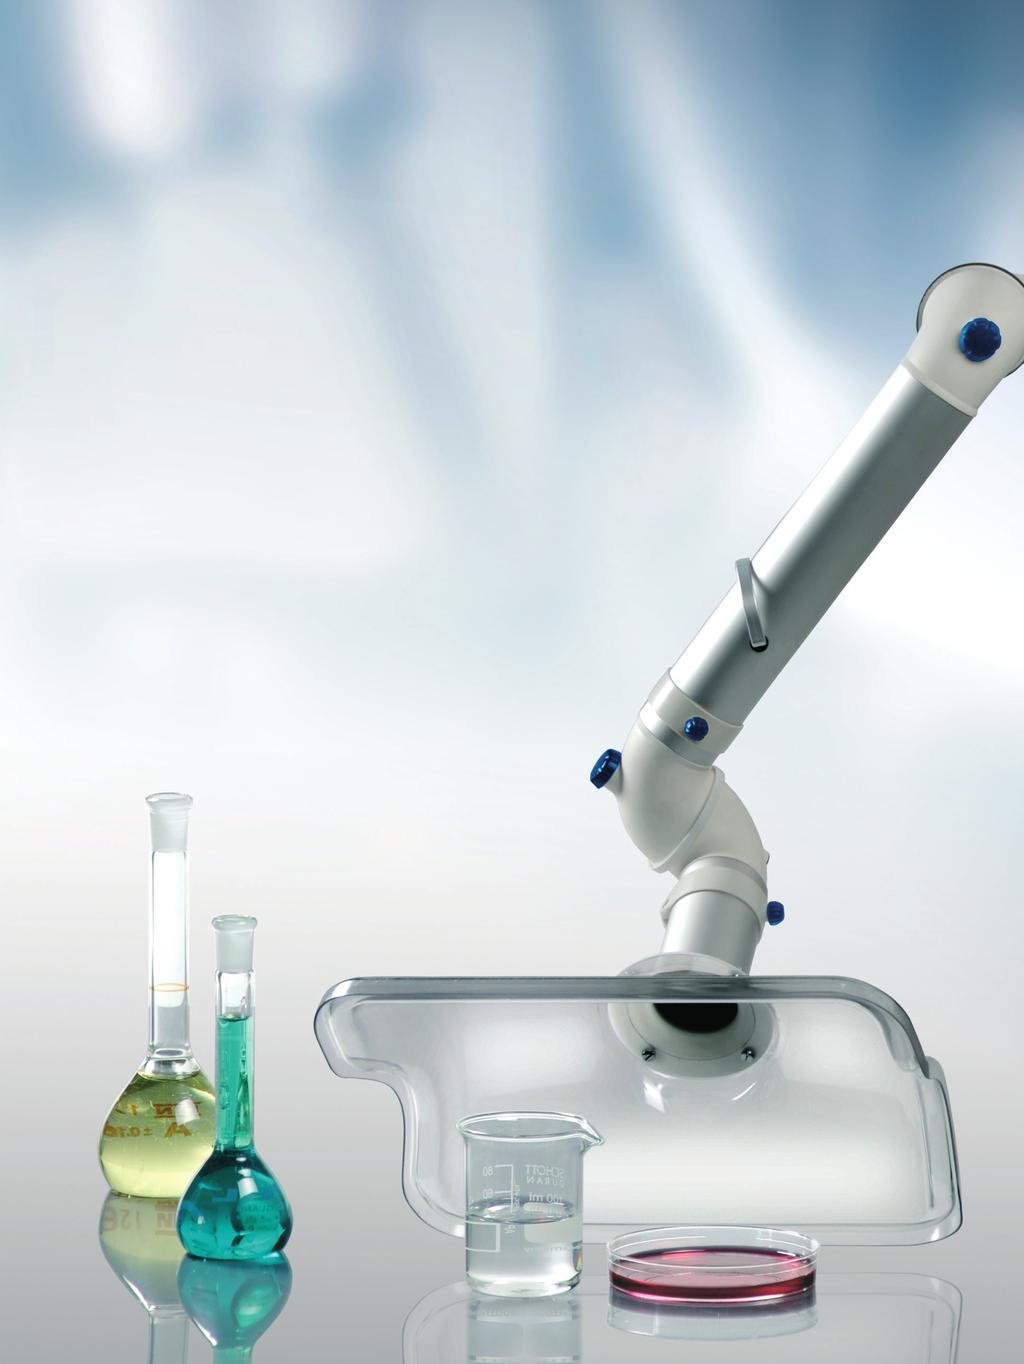 A new generation of BenchTop extraction arms with unbeatable flexibility Nederman introduces a new generation of BenchTop arms the FX, FX and FX.